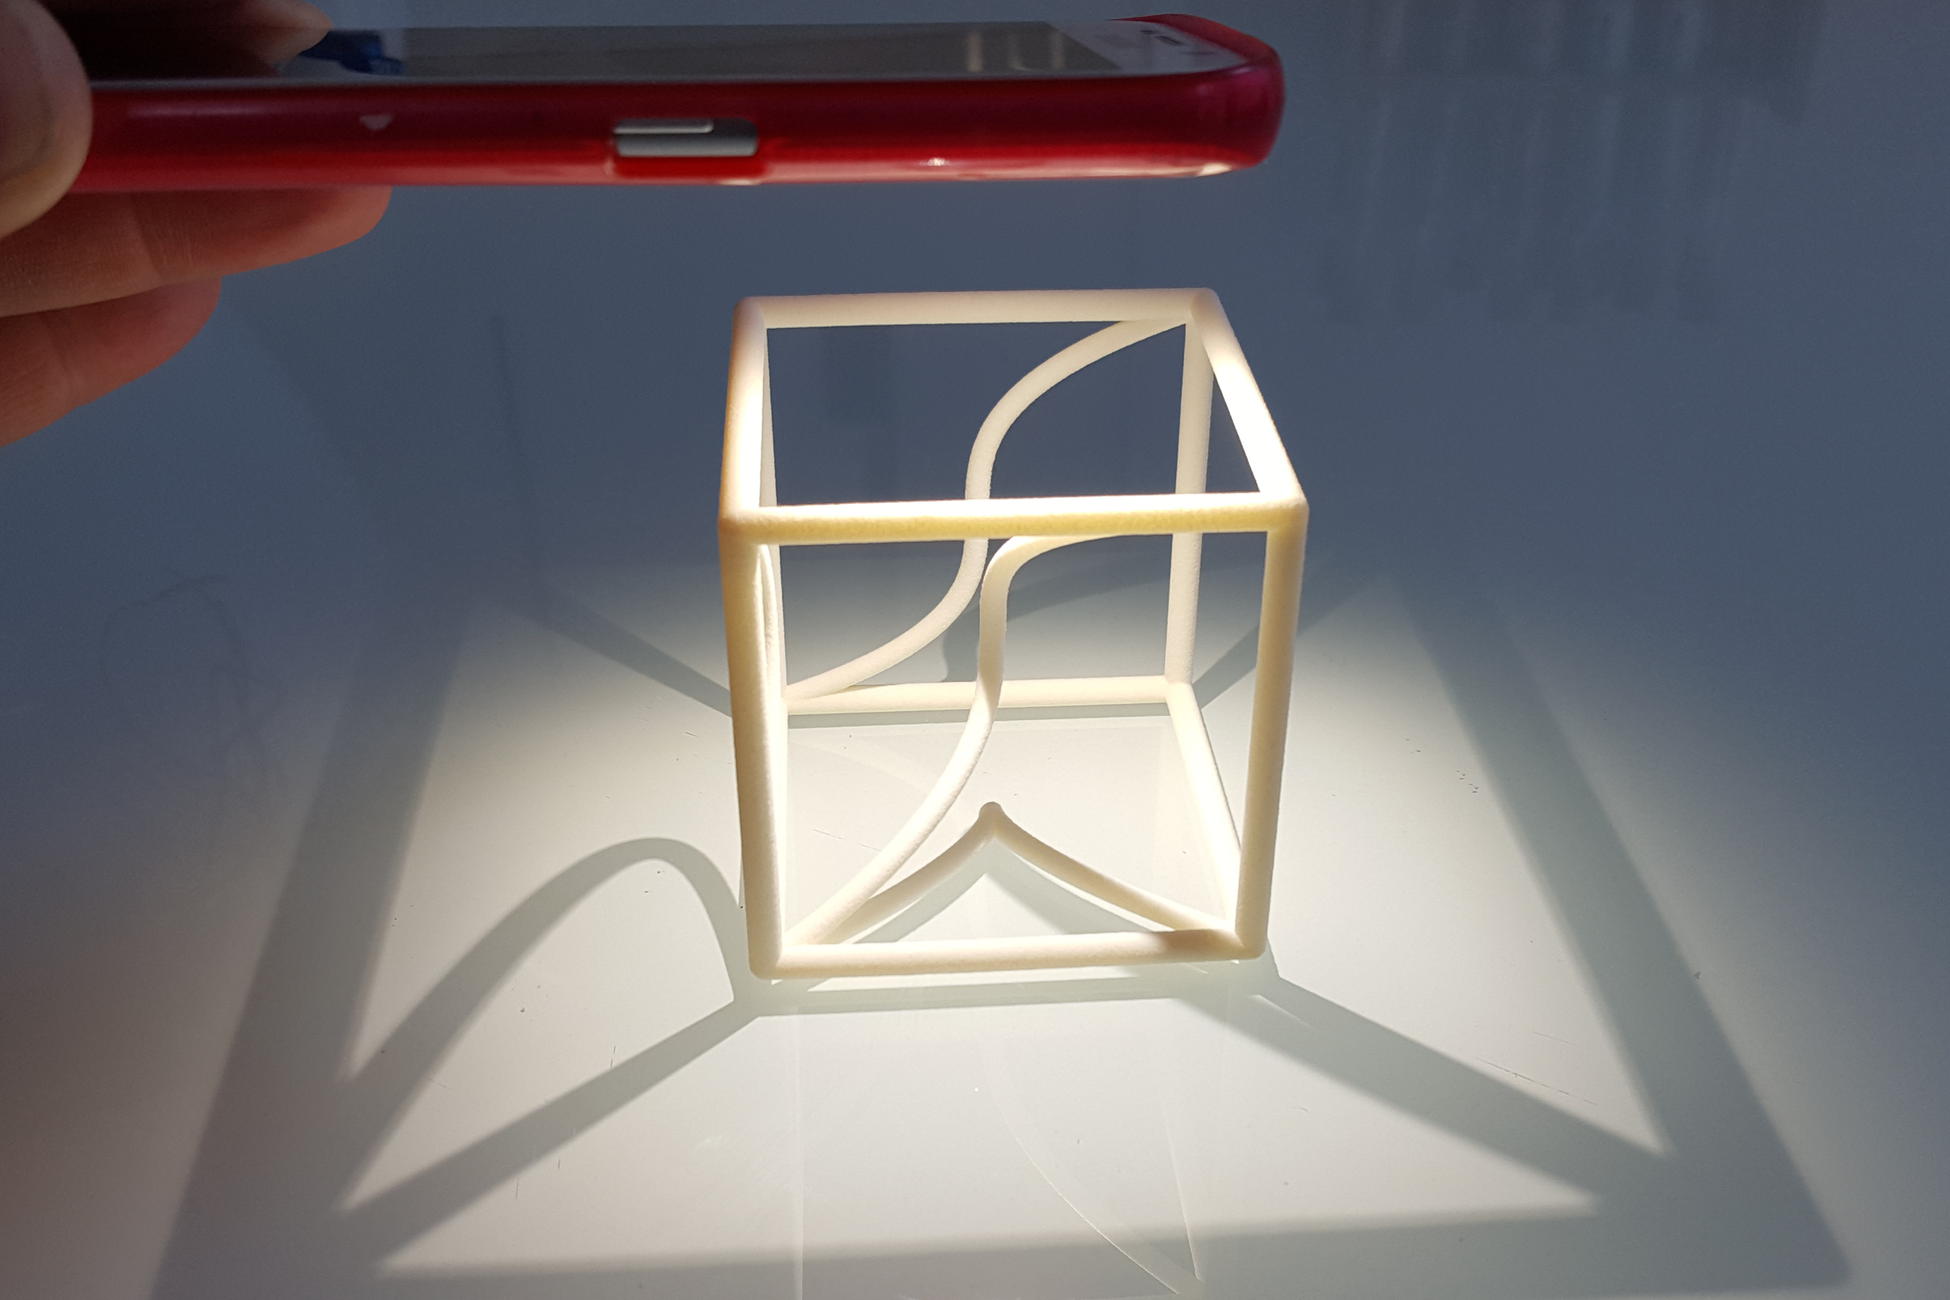 Space Curve in a cube with projections (1b) - a MO-Labs math model on Math-Sculpture.com